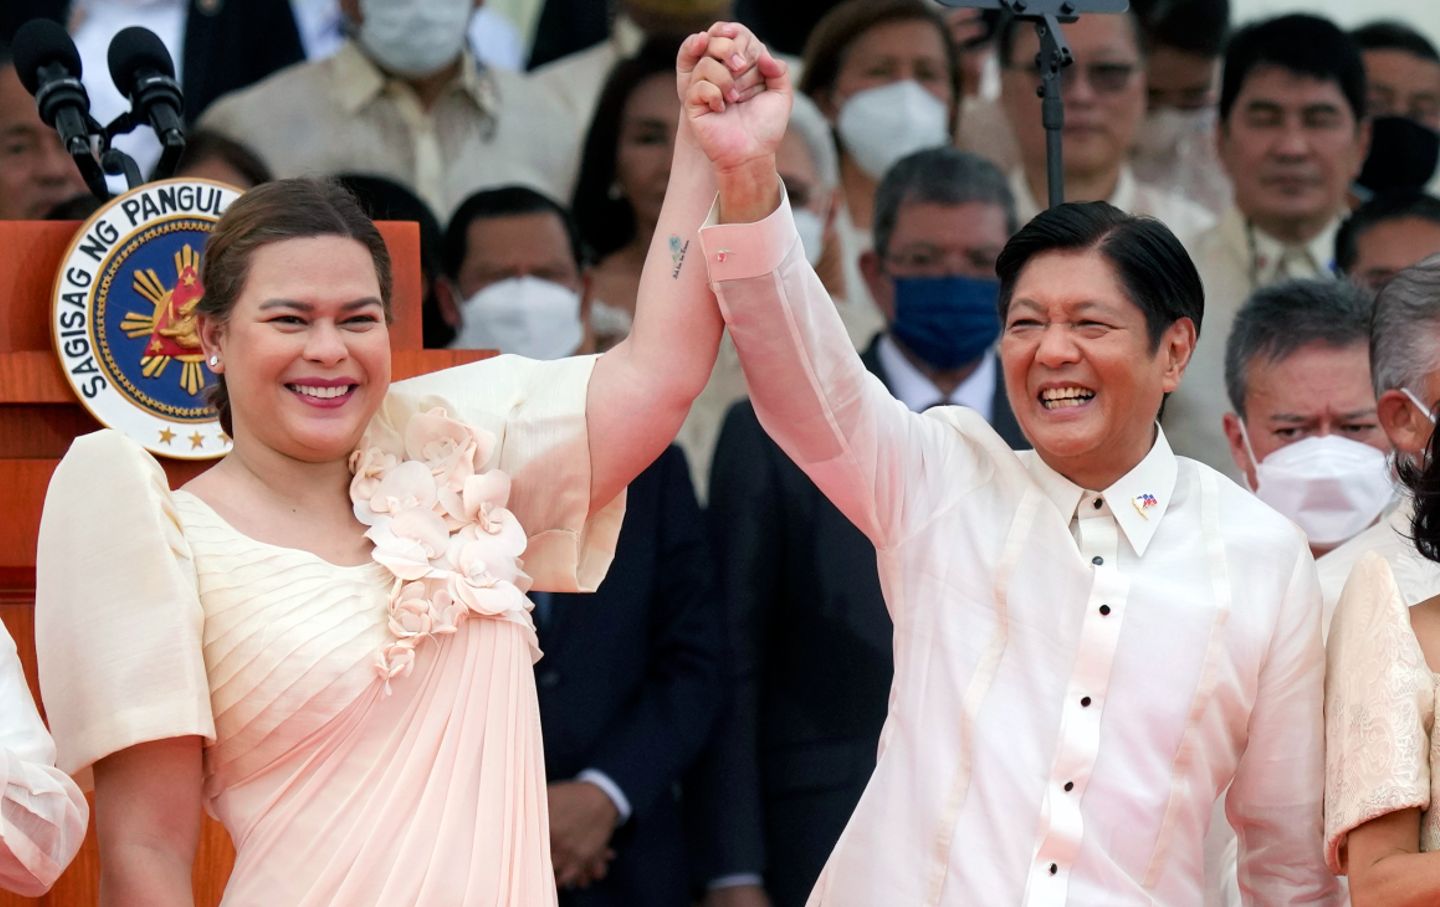 Ferdinand Marcos Jr. and Sara Duterte celebrate during their inauguration ceremony on June 30, 2022, in Manila.